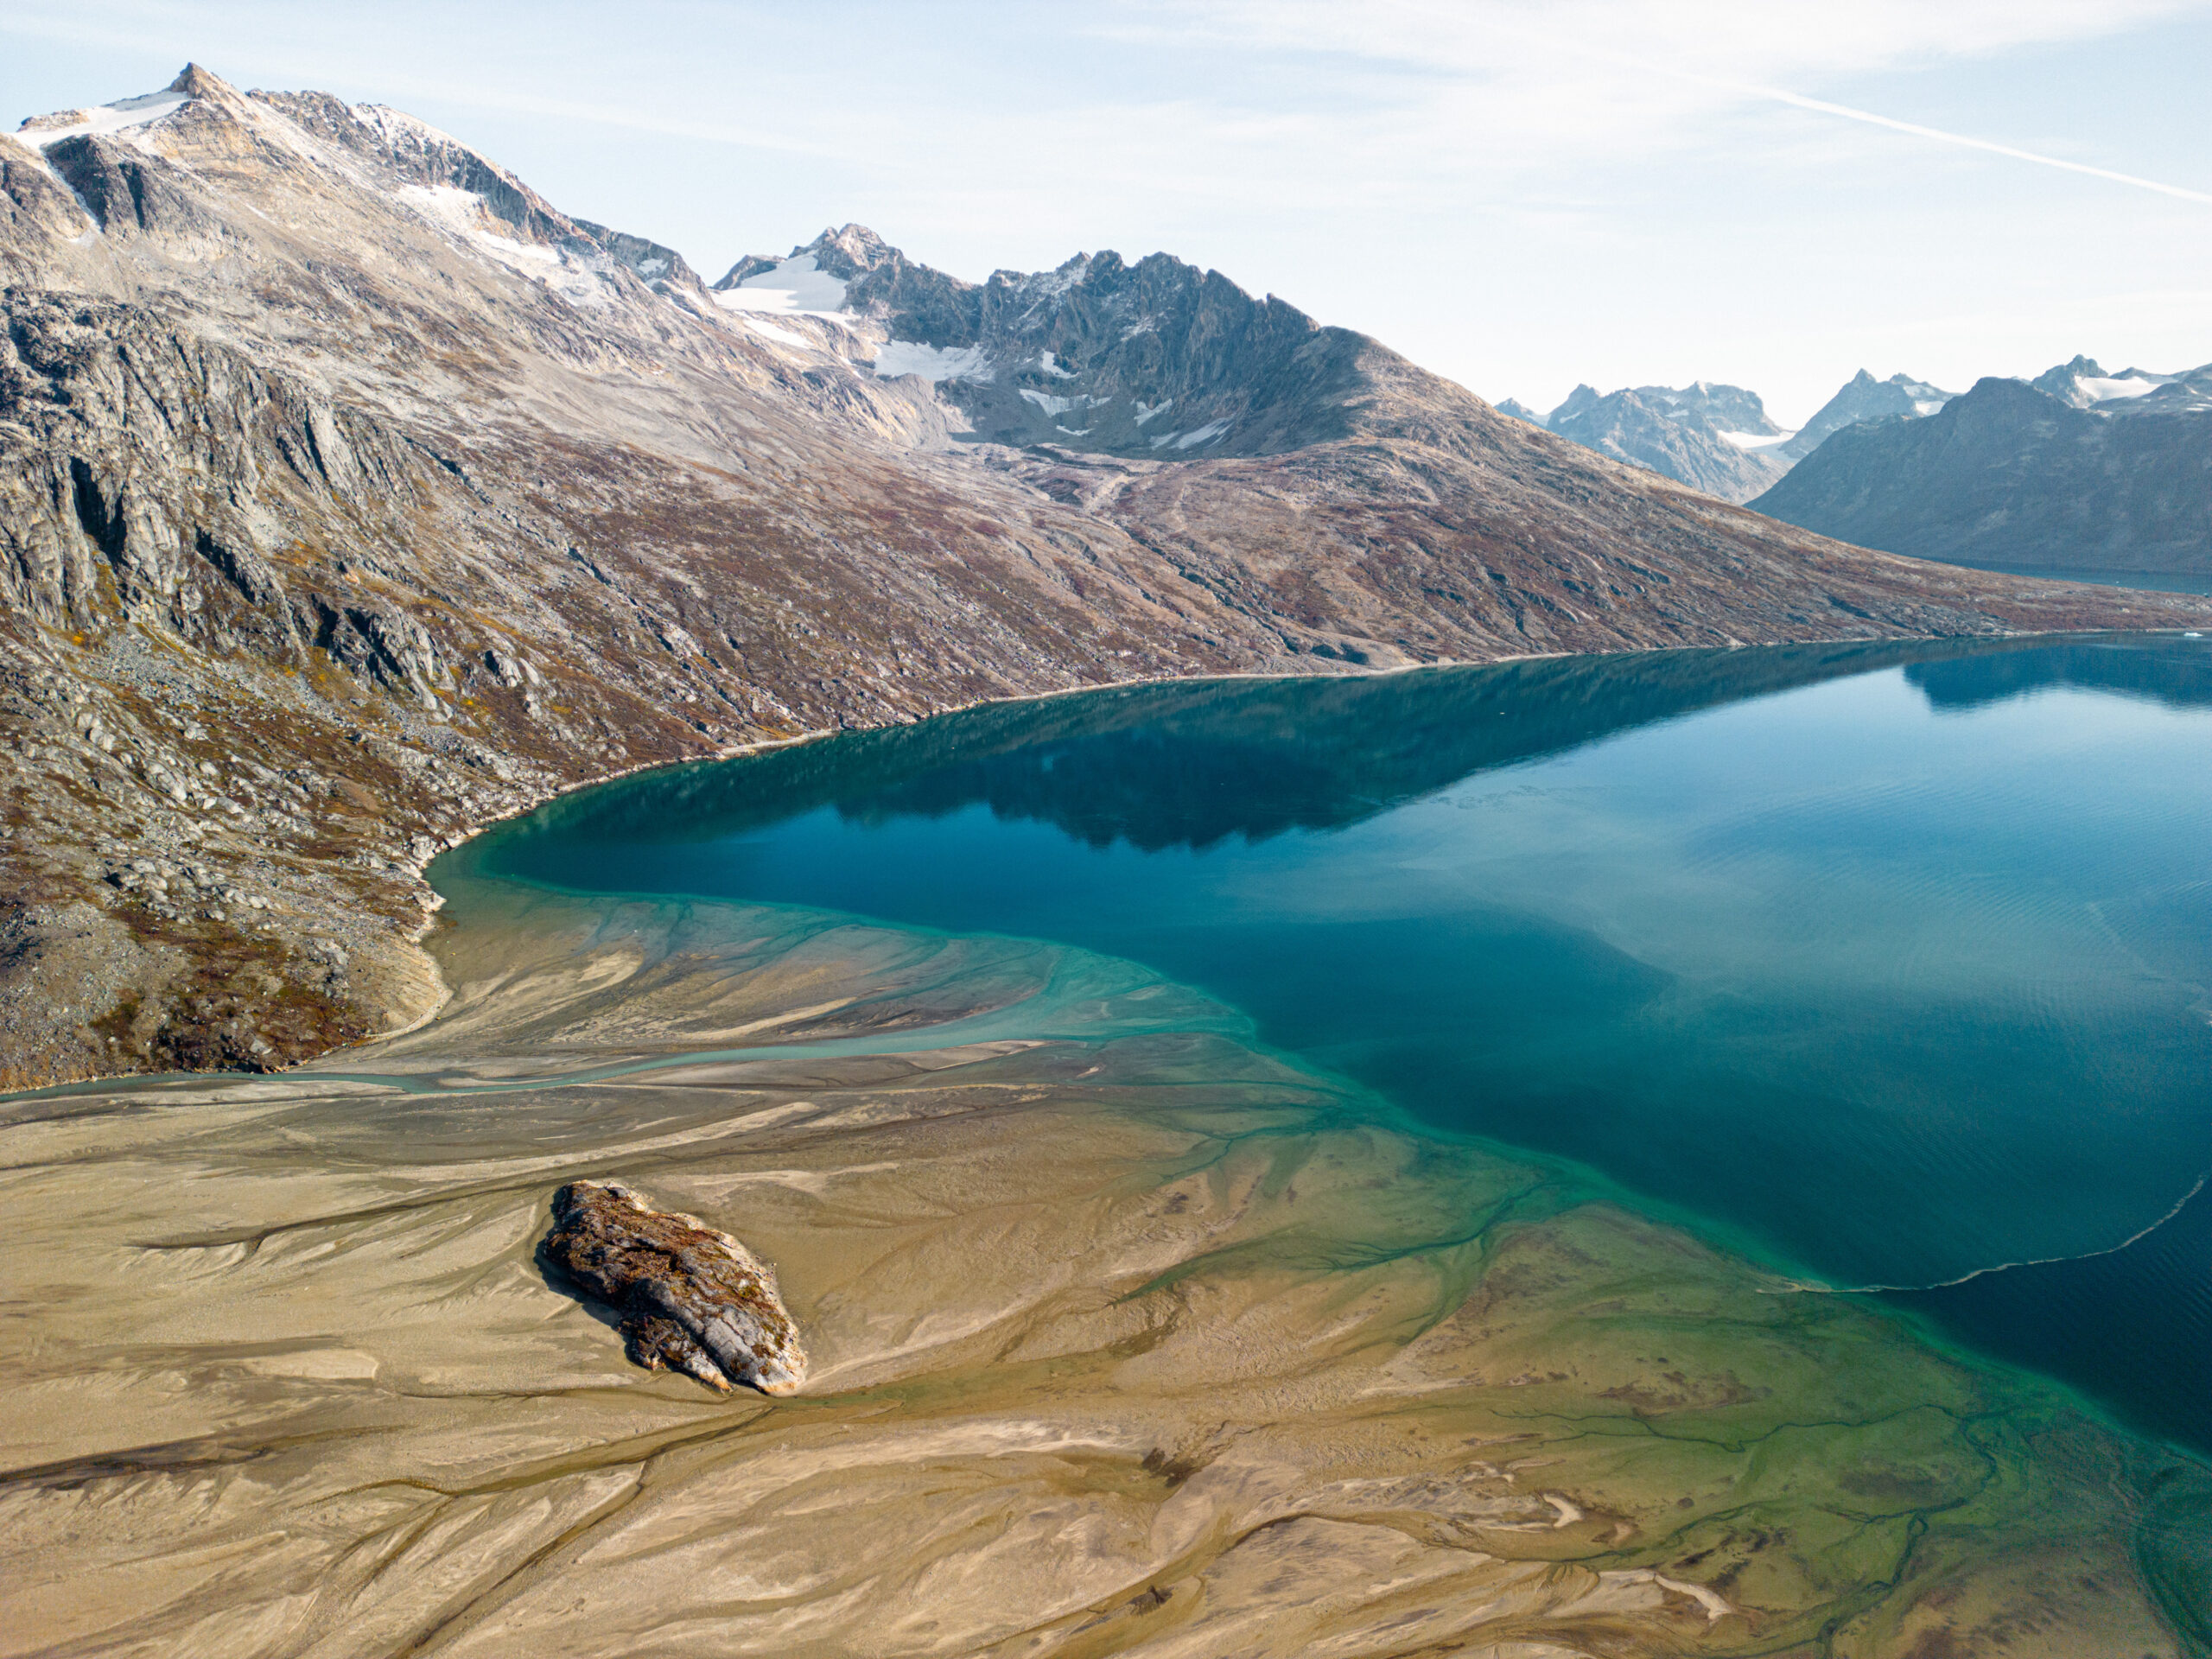 Mesmerizing blue water landscape in East Greenland. Photo by Chris Koenig - Visit Greenland